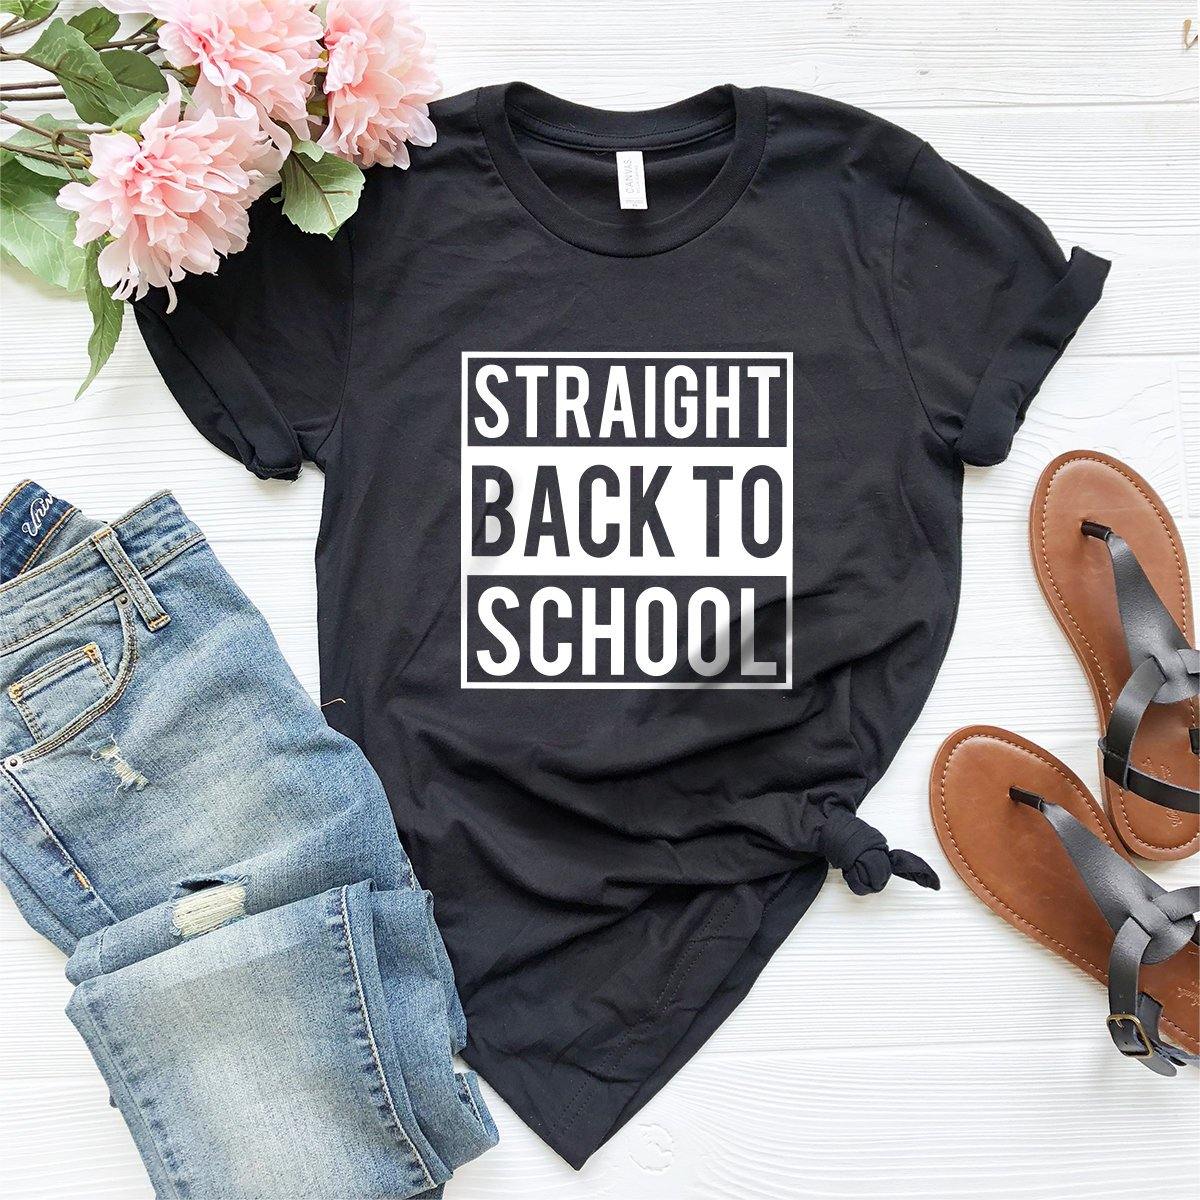 Back To School Shirt, First Day Of School, Funny School Shirt, Teacher Shirt, Funny Teacher Shirt, Home School Shirt - Fastdeliverytees.com